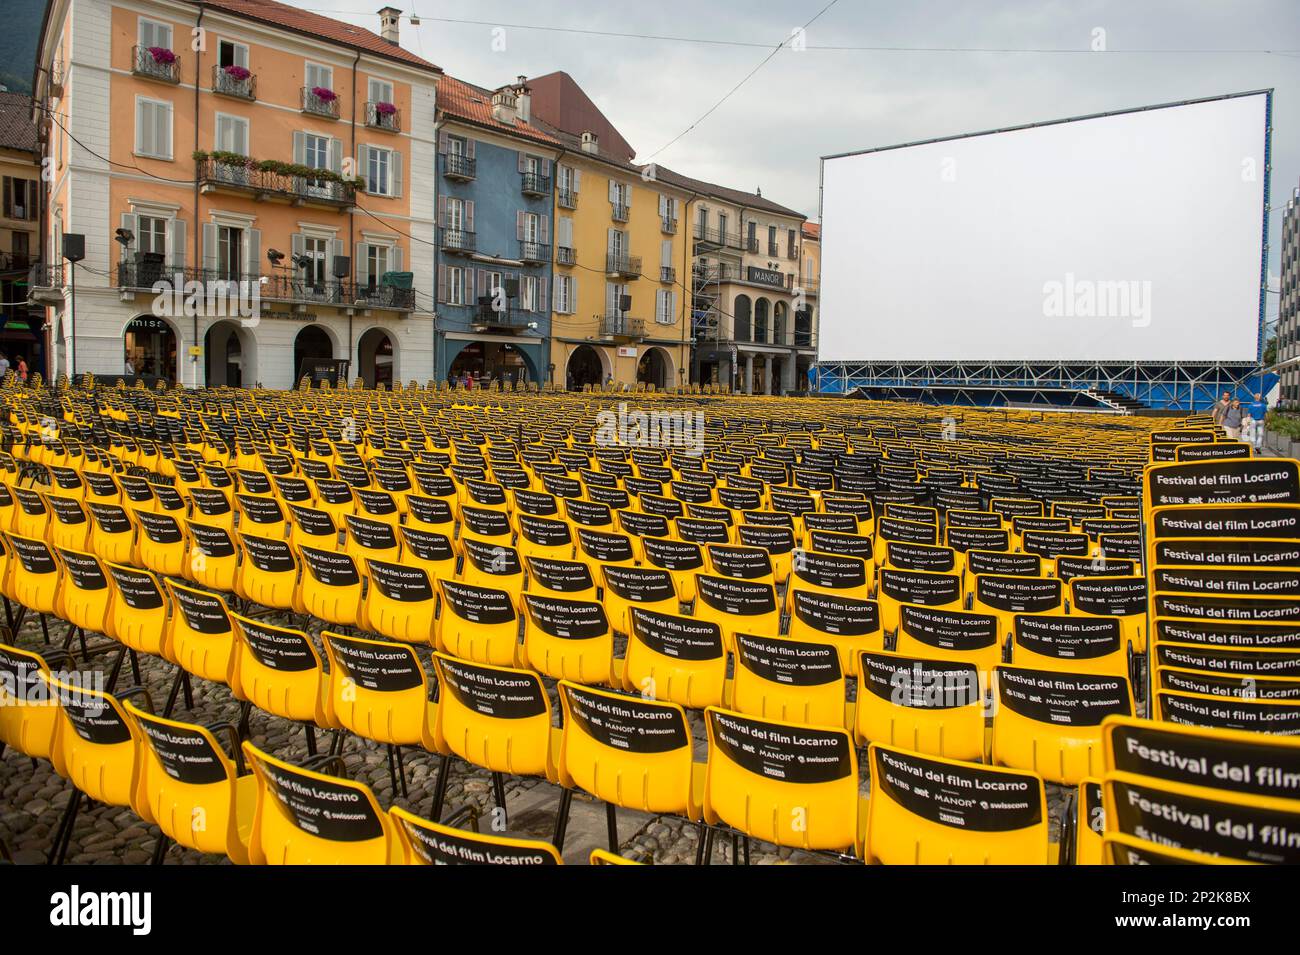 General view of the Piazza Grande Square of Locarno one day before the  beginning of the 68. Locarno International Film Festival, Tuesday, Aug. 4,  2015, in Locarno, Switzerland. The festival runs from